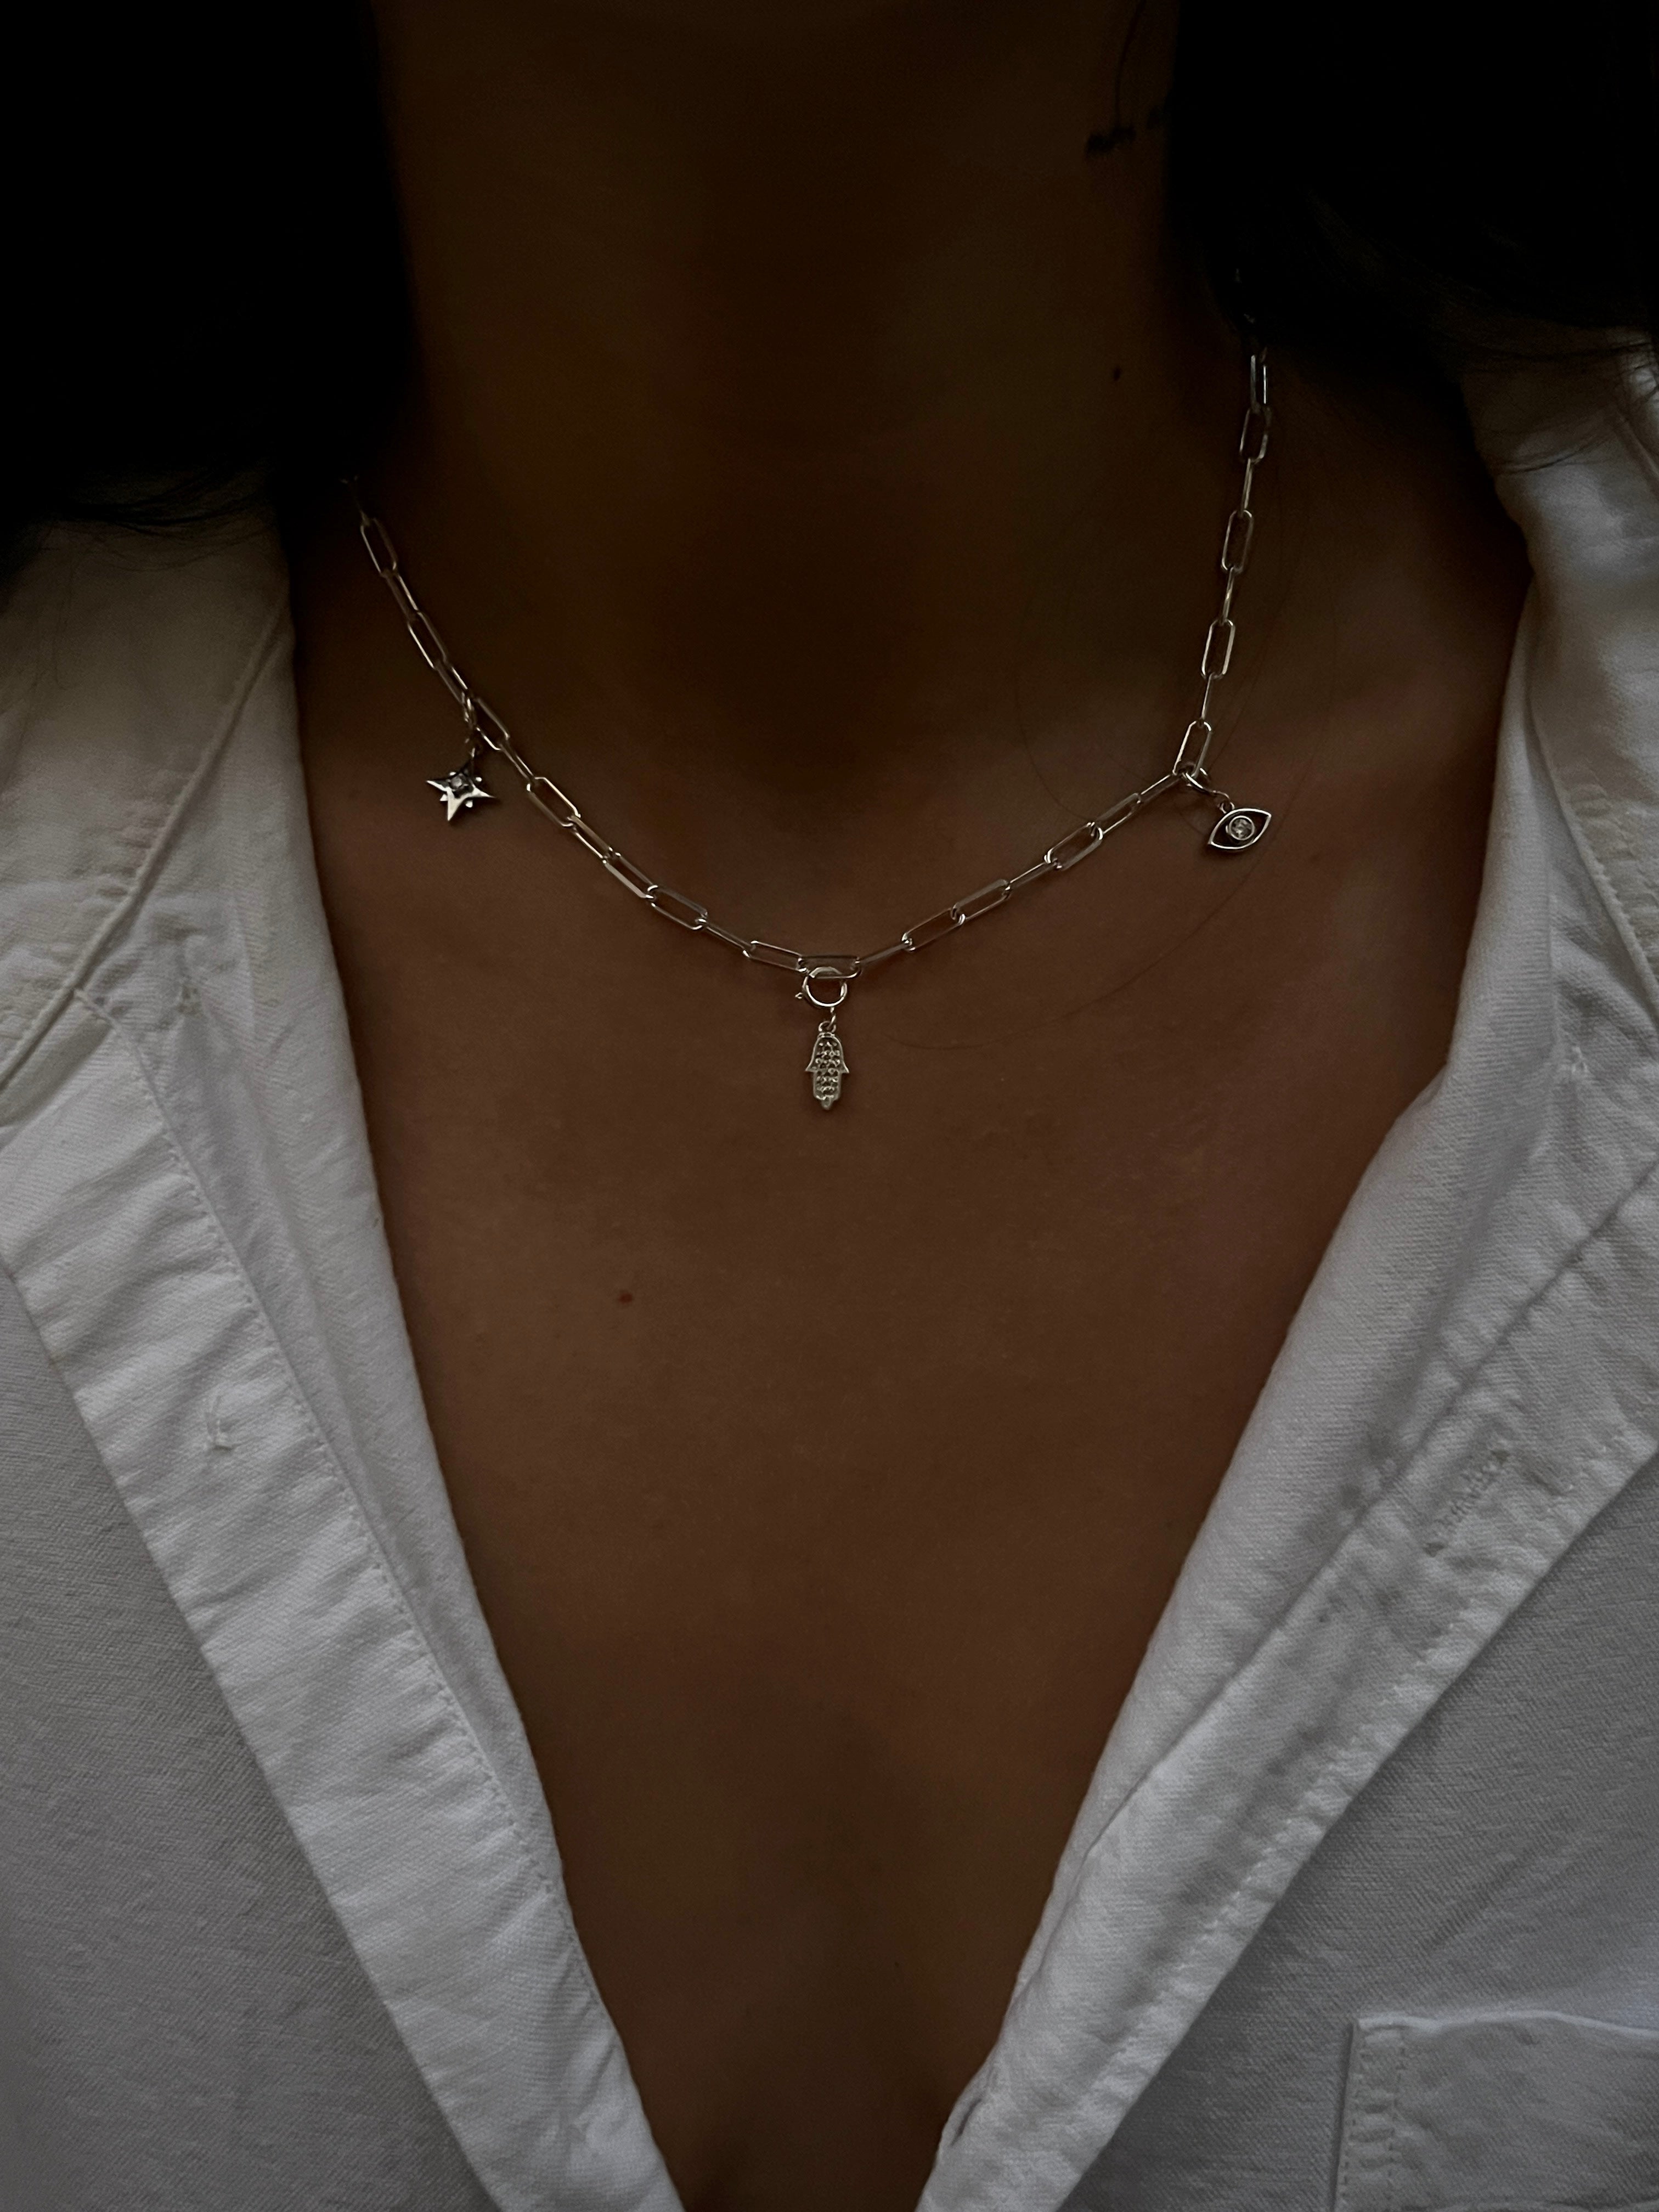 Shay’s Charms Necklace